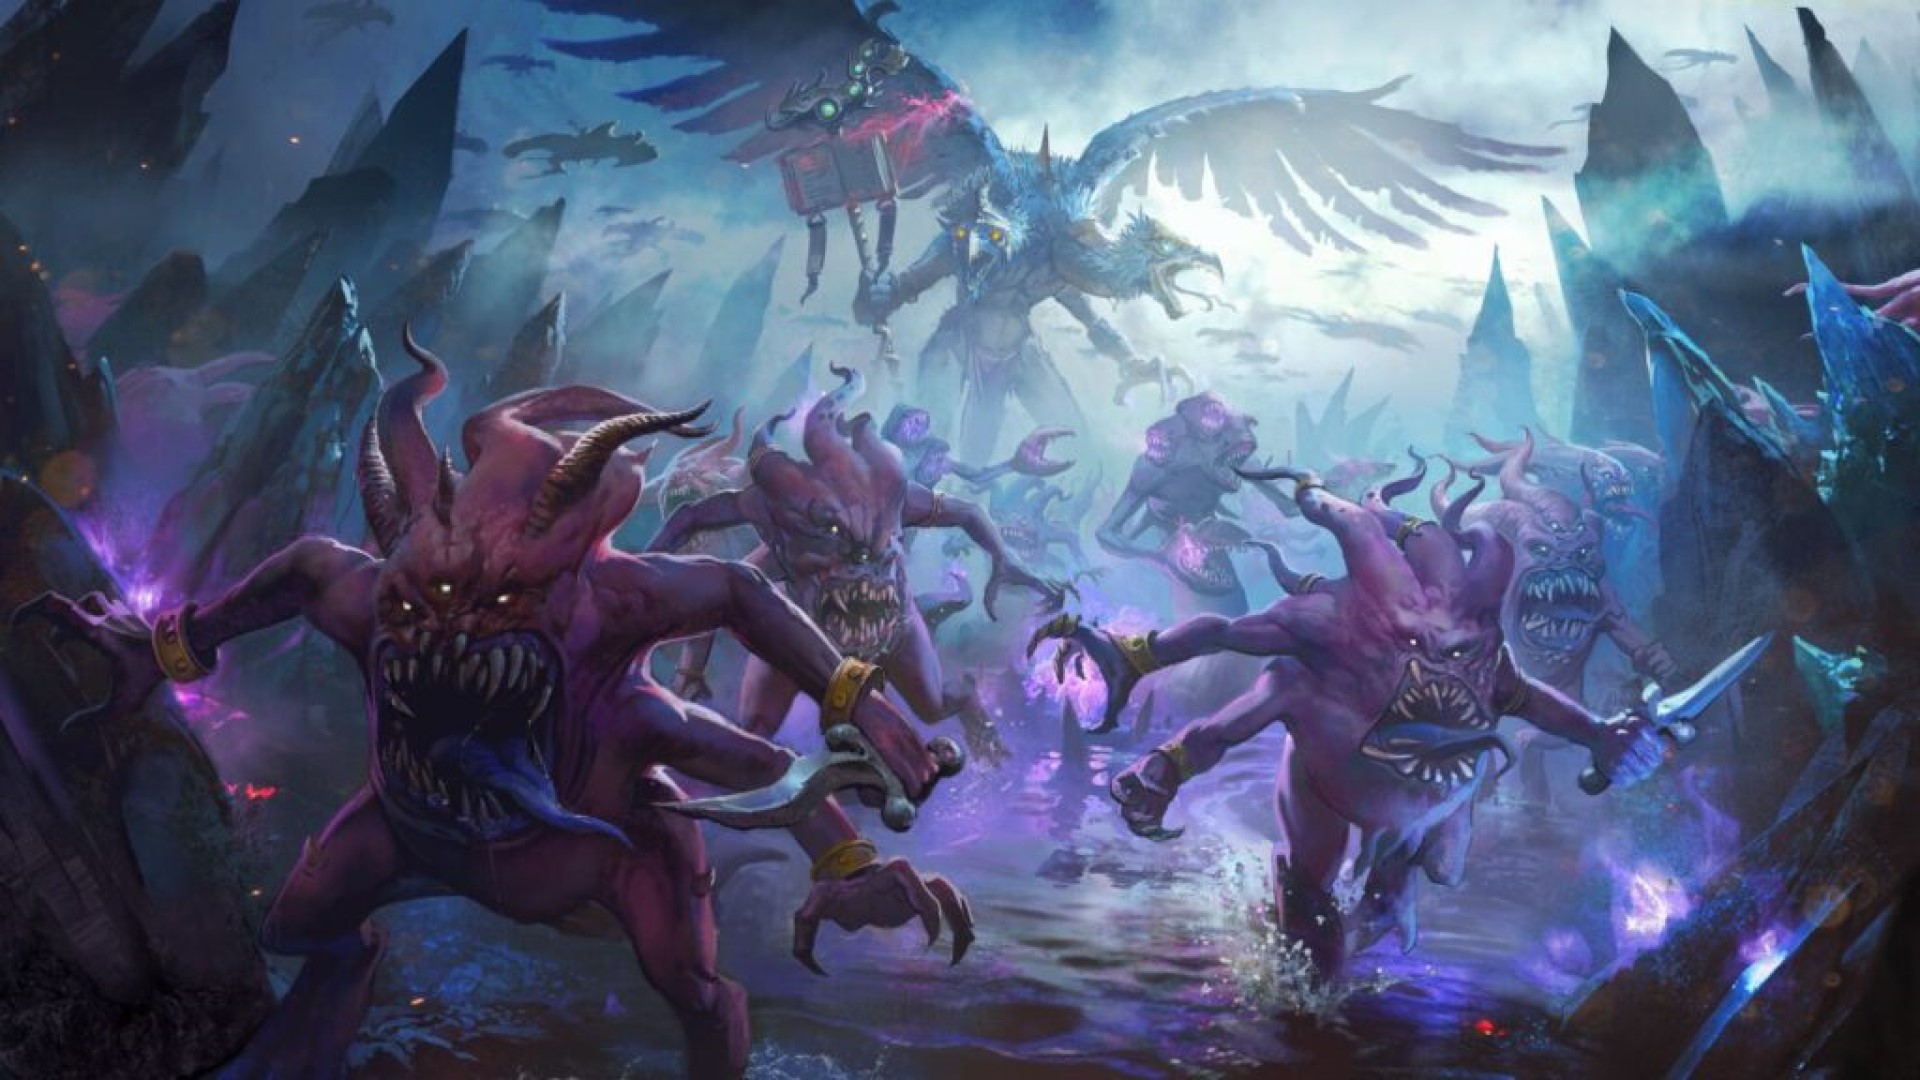 Total Warhammer 3s Tzeentch Army Roster Is Full Of Gibbering Mouthy Horrors 0330